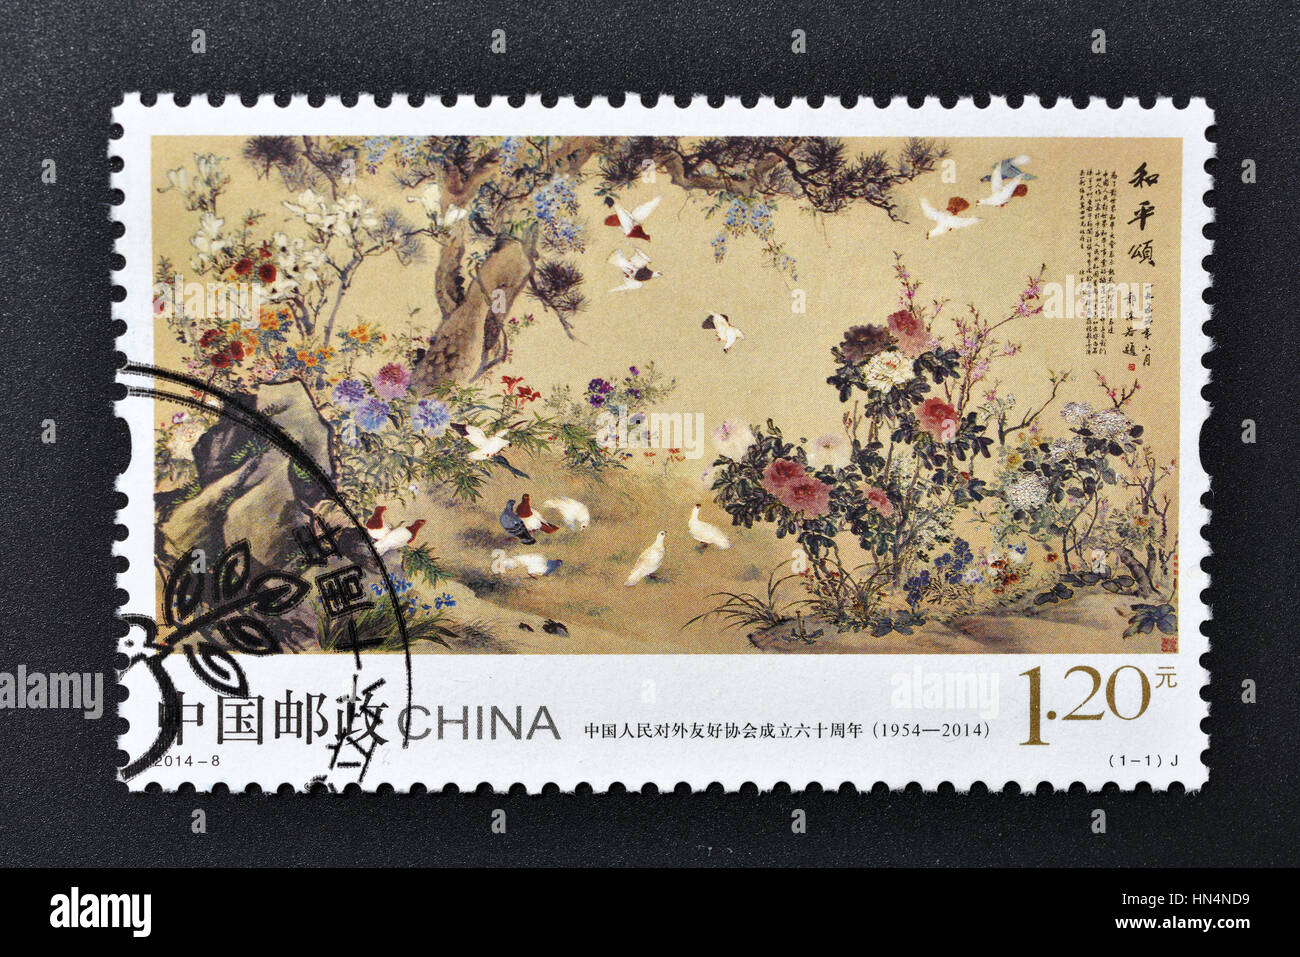 CHINA - CIRCA 2014: A stamp printed in China shows 2014-8 60th Ann Association Friendship Foreign Countries. circa 2014. Stock Photo